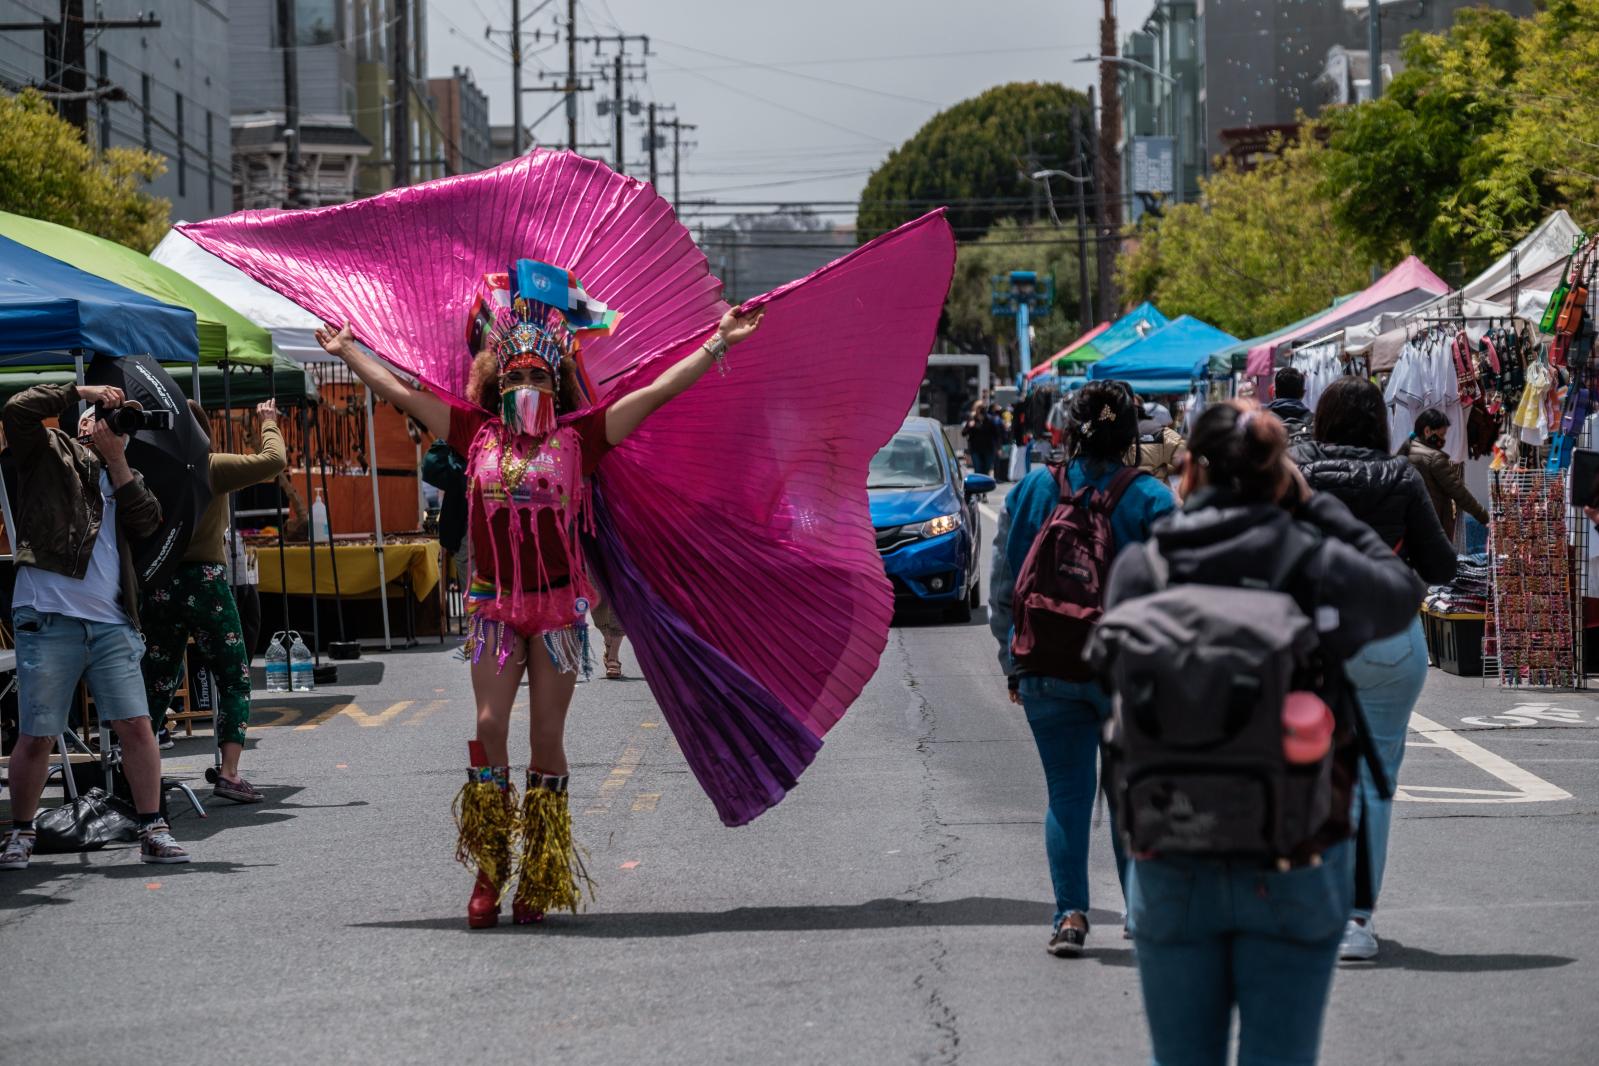 A visitor photographs Juan Davila as Carnaval celebrations kicked off in San Francisco on Saturday, May 29, 2021. For the second year, CANA-Carnaval San Francisco will hold a community resource fair in place of its traditional parade and festival. The event will celebrate the resilience of those who have been disproportionately affected by the pandemic and provide numerous health and economic equity resources.